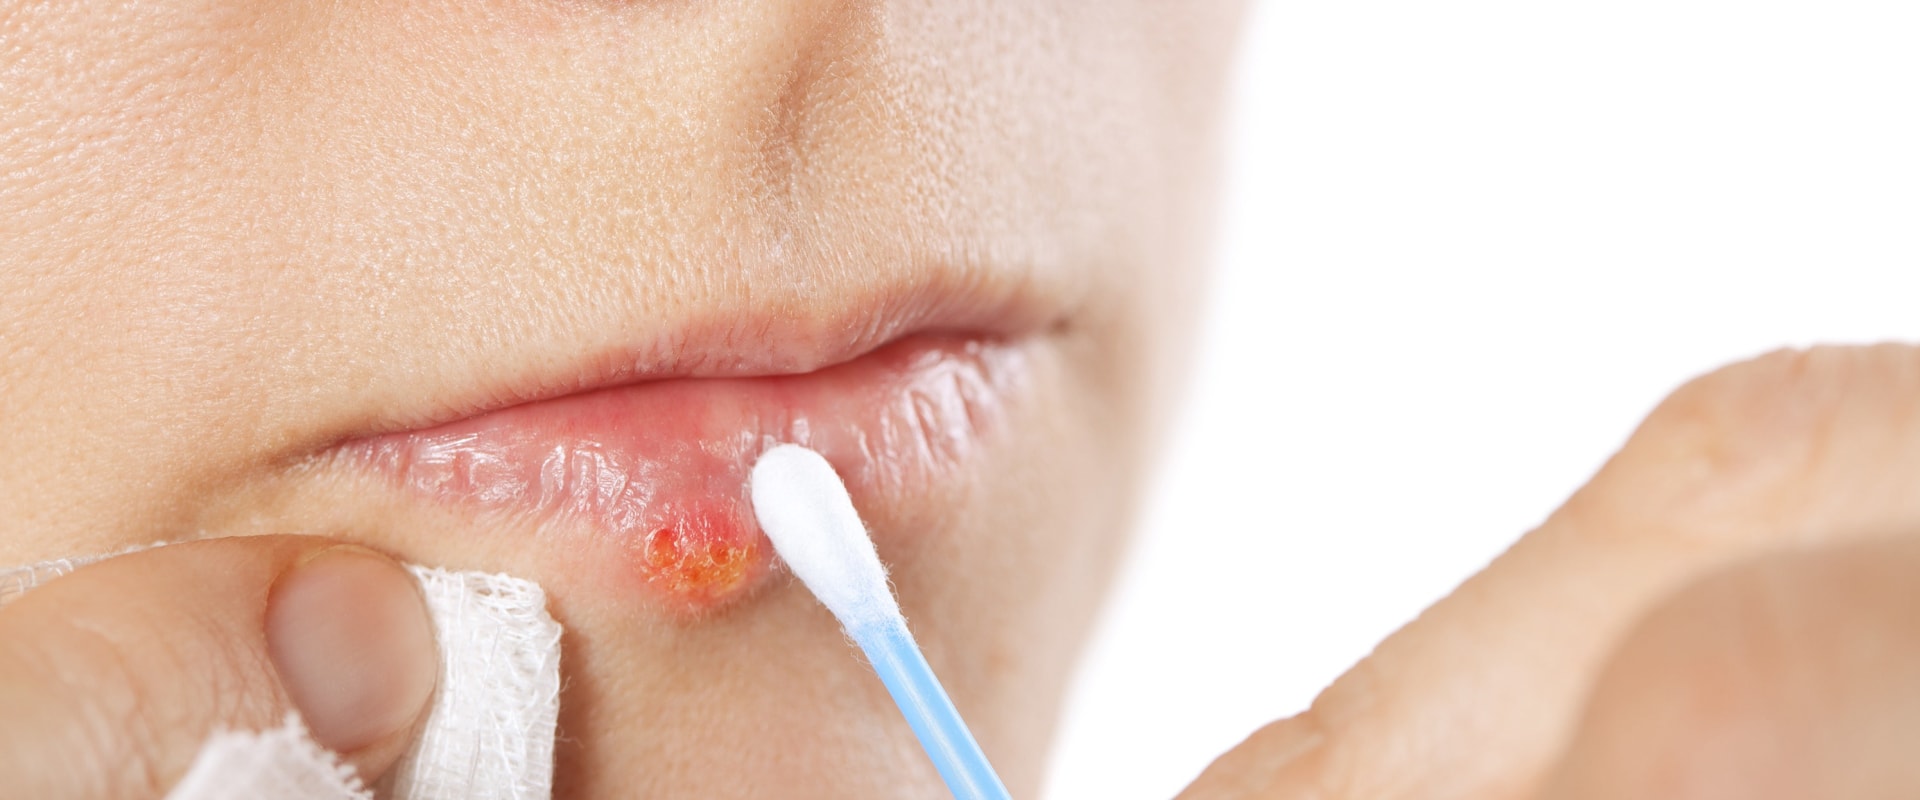 Topical Creams and Ointments: Treatments for Herpes Lips and Over-the-Counter Remedies